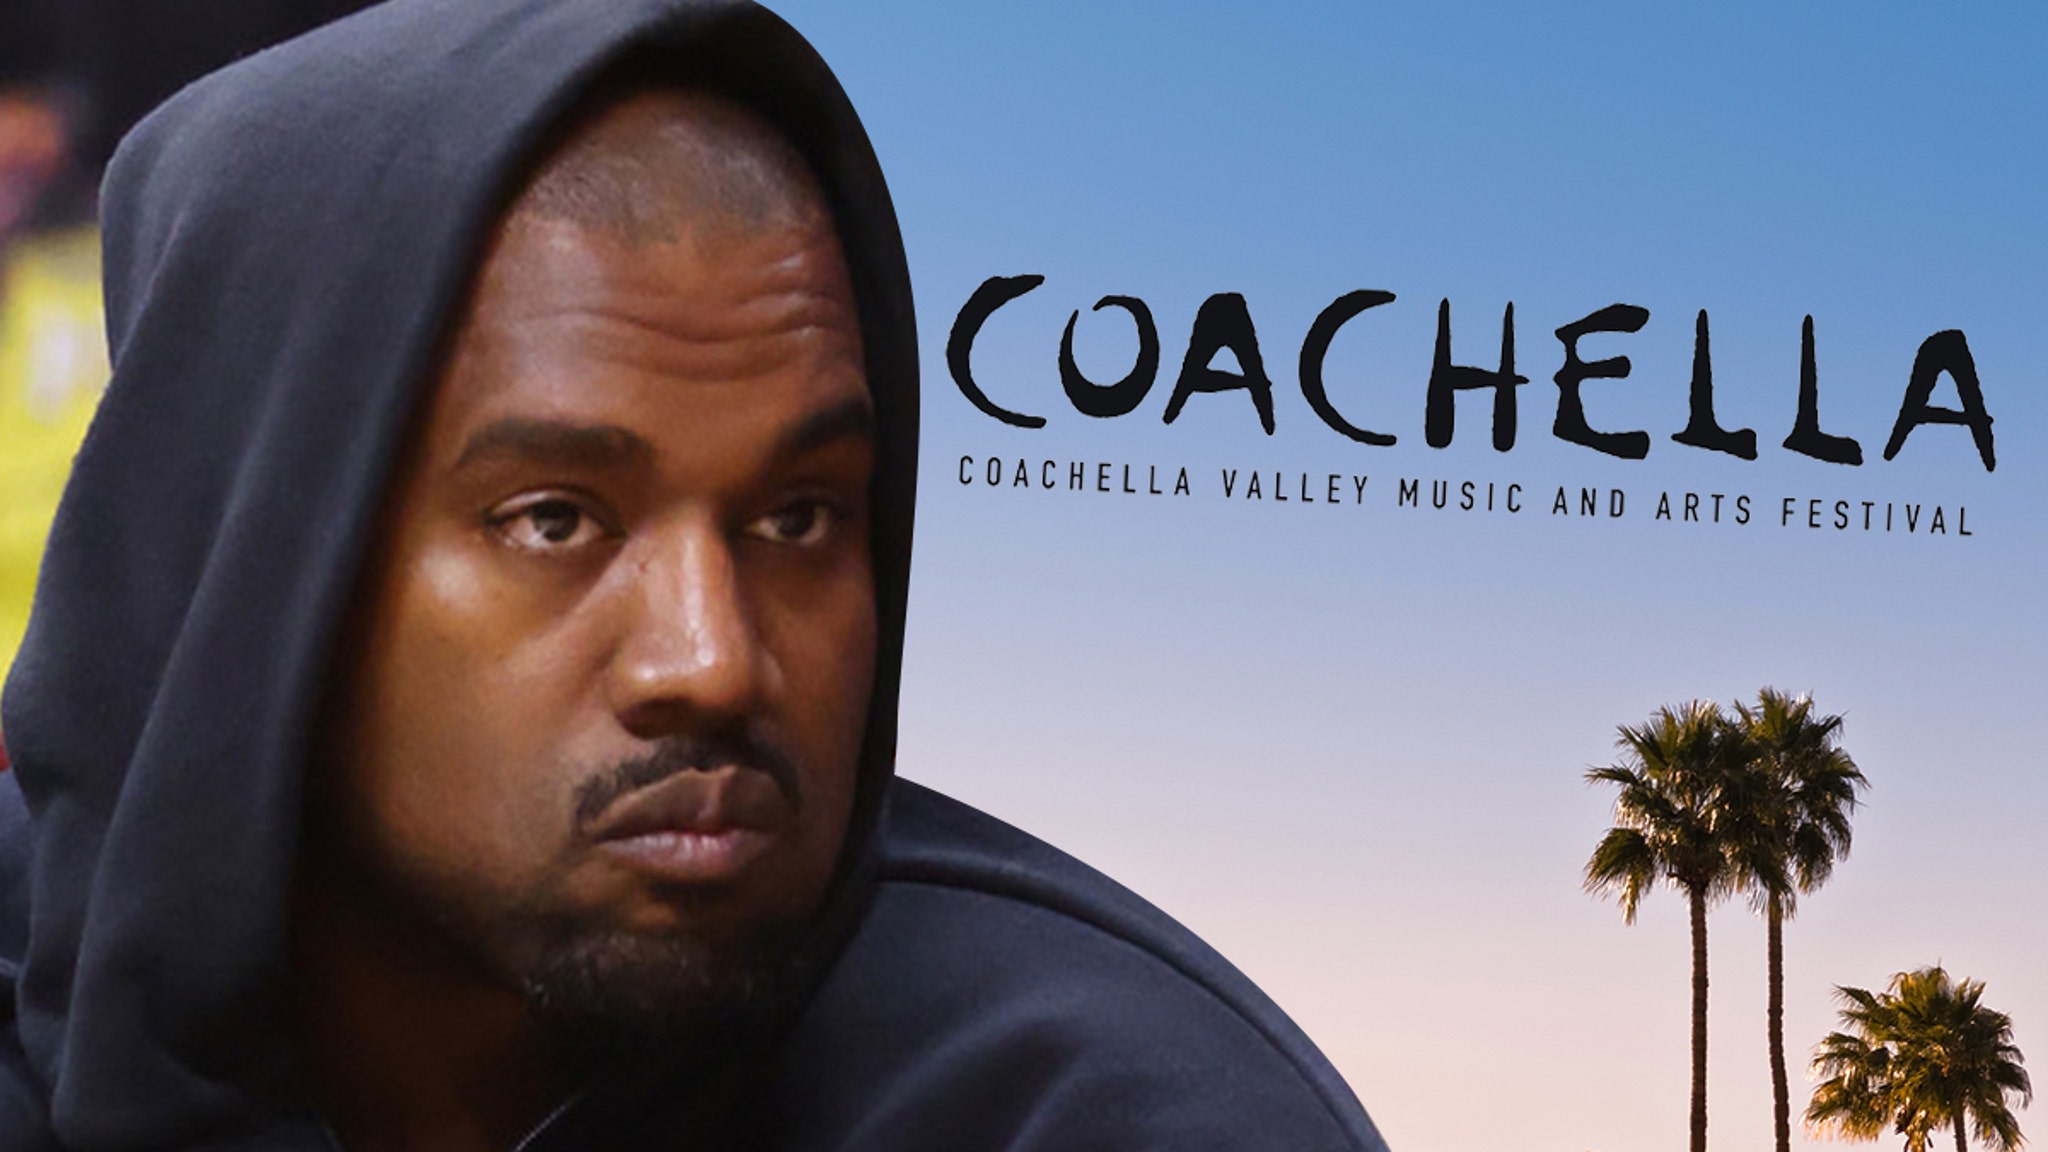 Coachella Organizers Aren’t Pissed at Kanye, Understand He’s Working on Himself